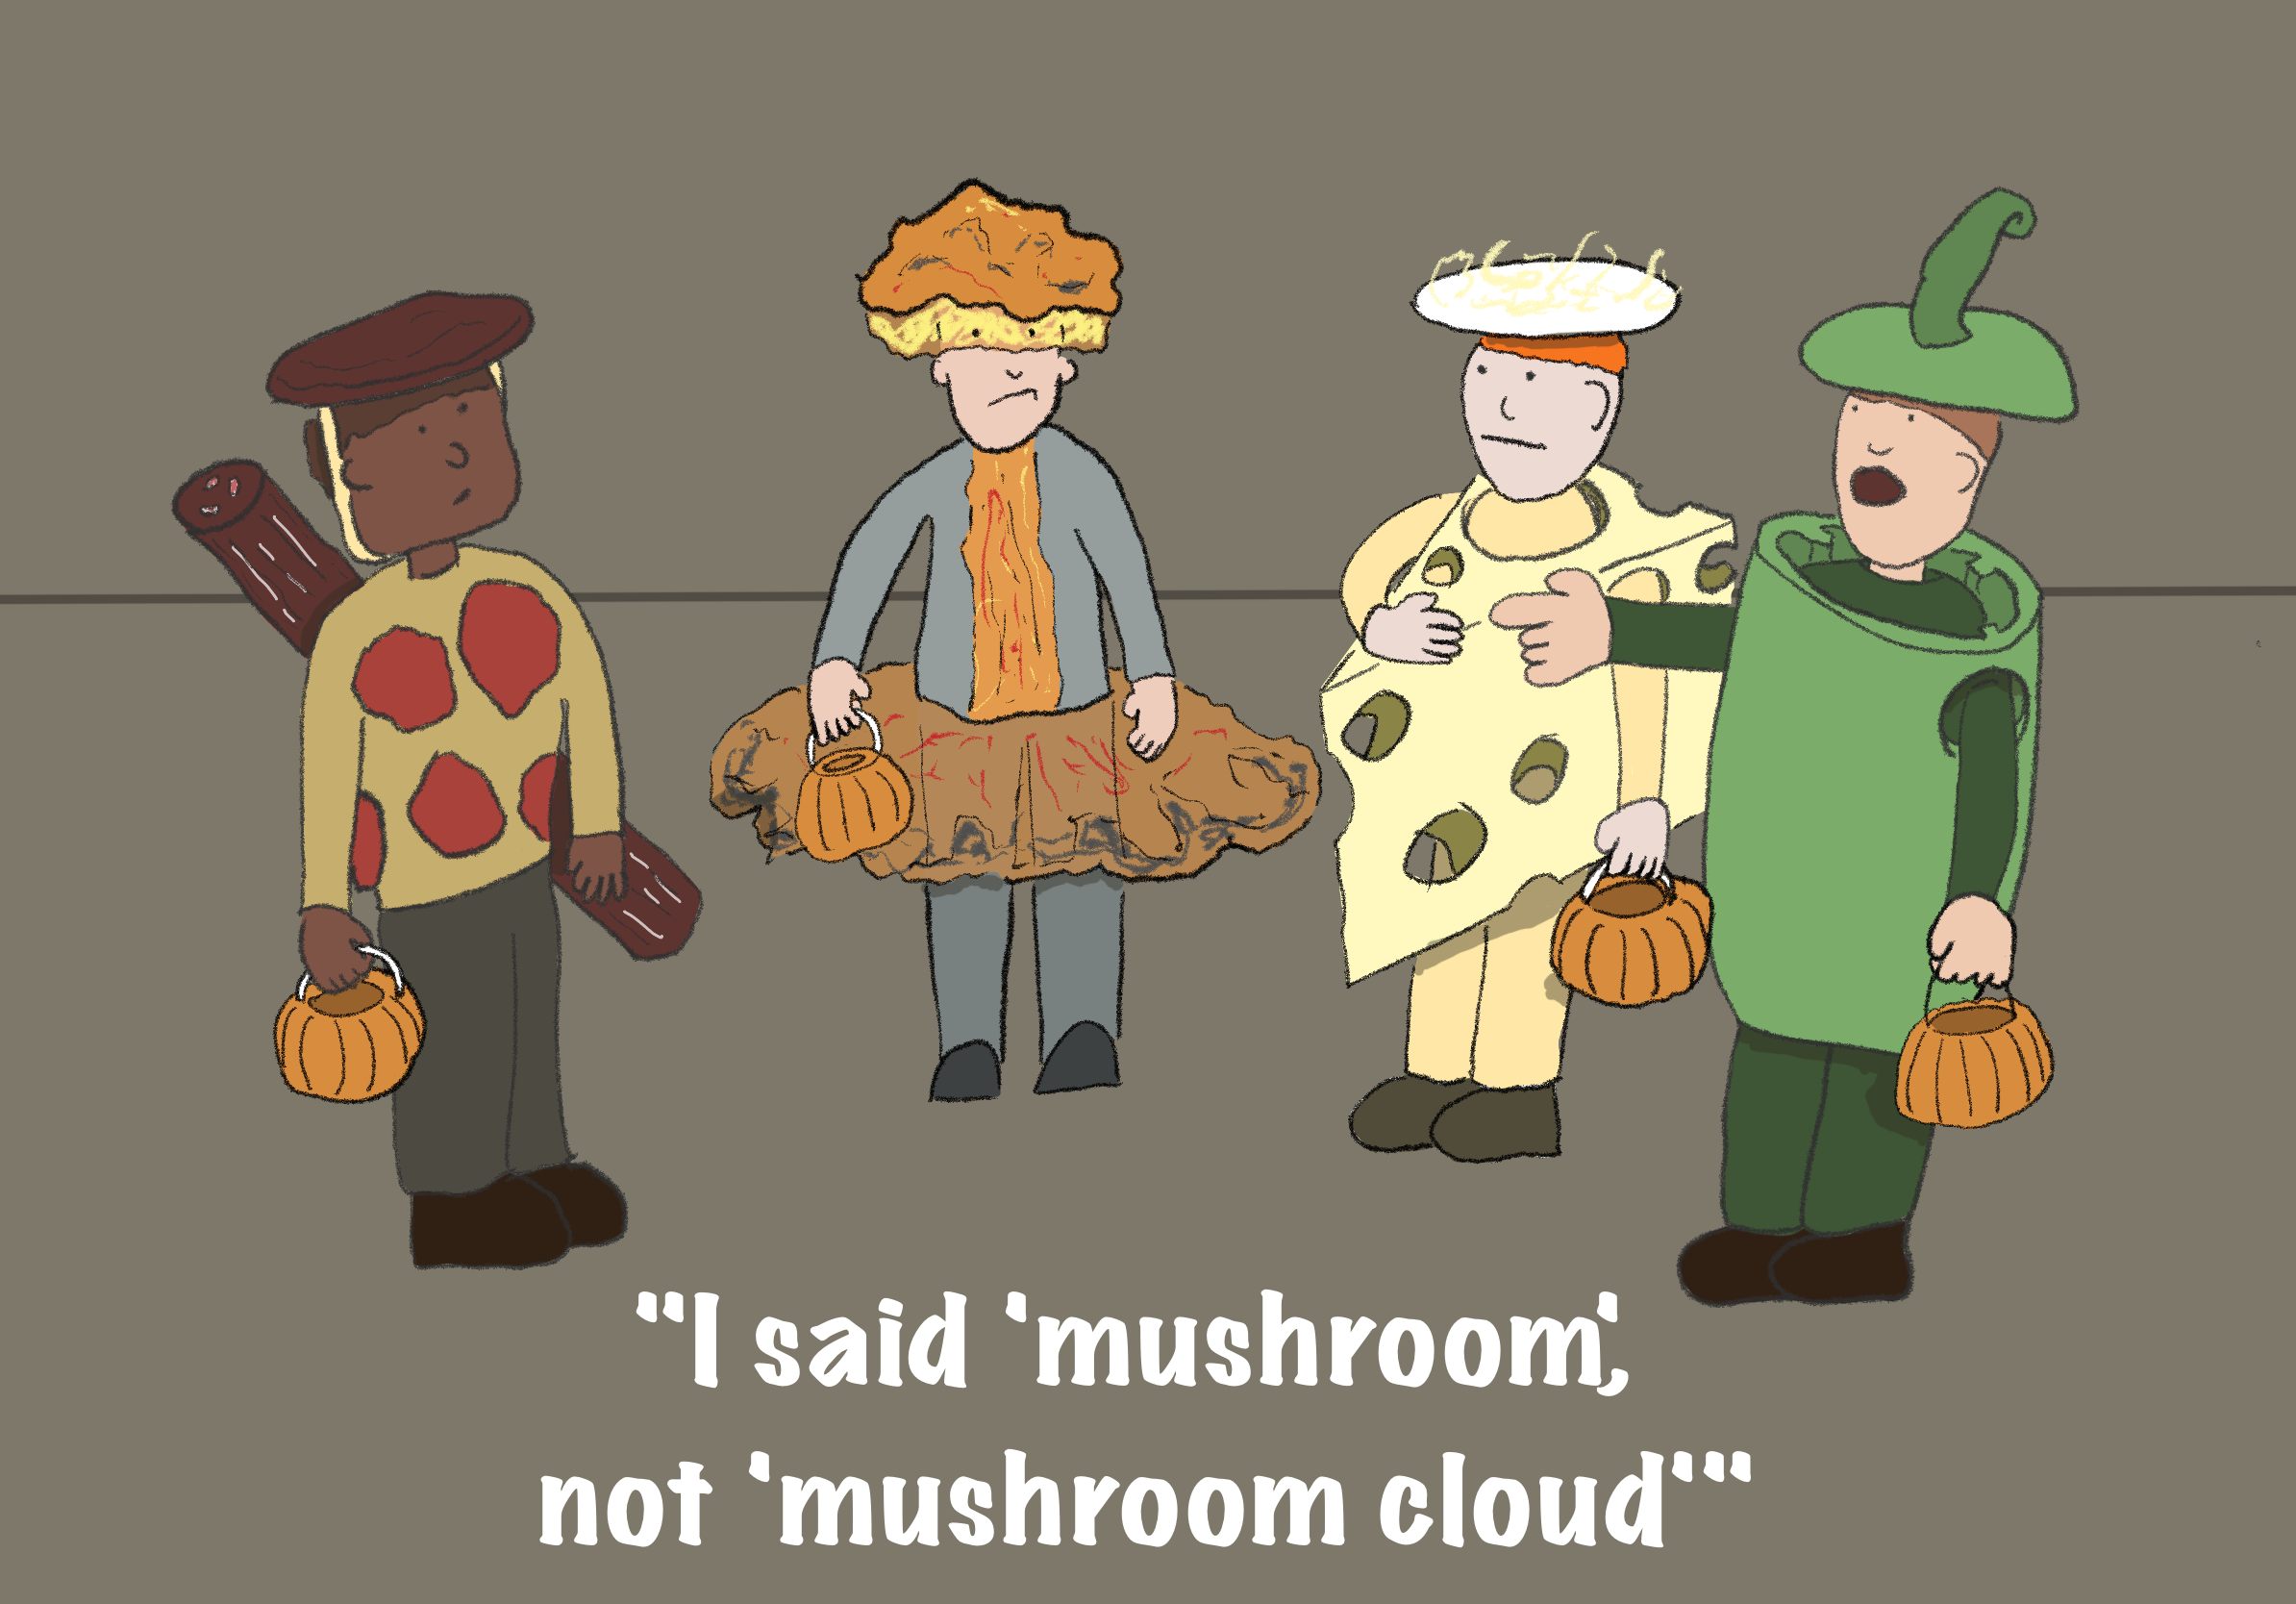 Four kids in halloween costumes. 3 of them are dressed as pizza toppings (pepperoni, cheese, green pepper. The fourth kid is dressed as an atomic mushroom cloud. The green pepper kid is pointing at the odd one out saying “I said ‘mushroom’, not ‘mushroom cloud’